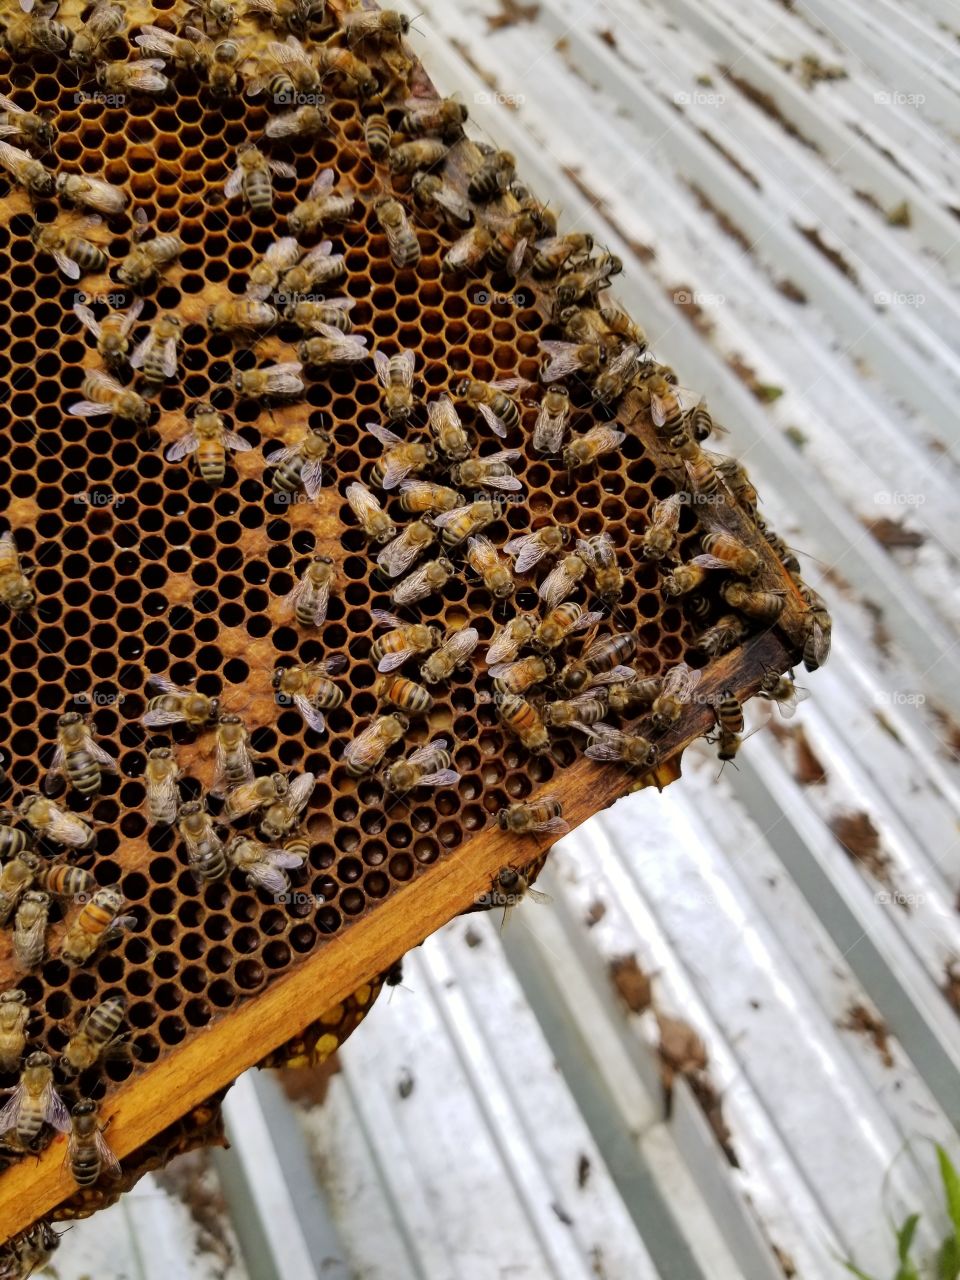 Bees and the hive